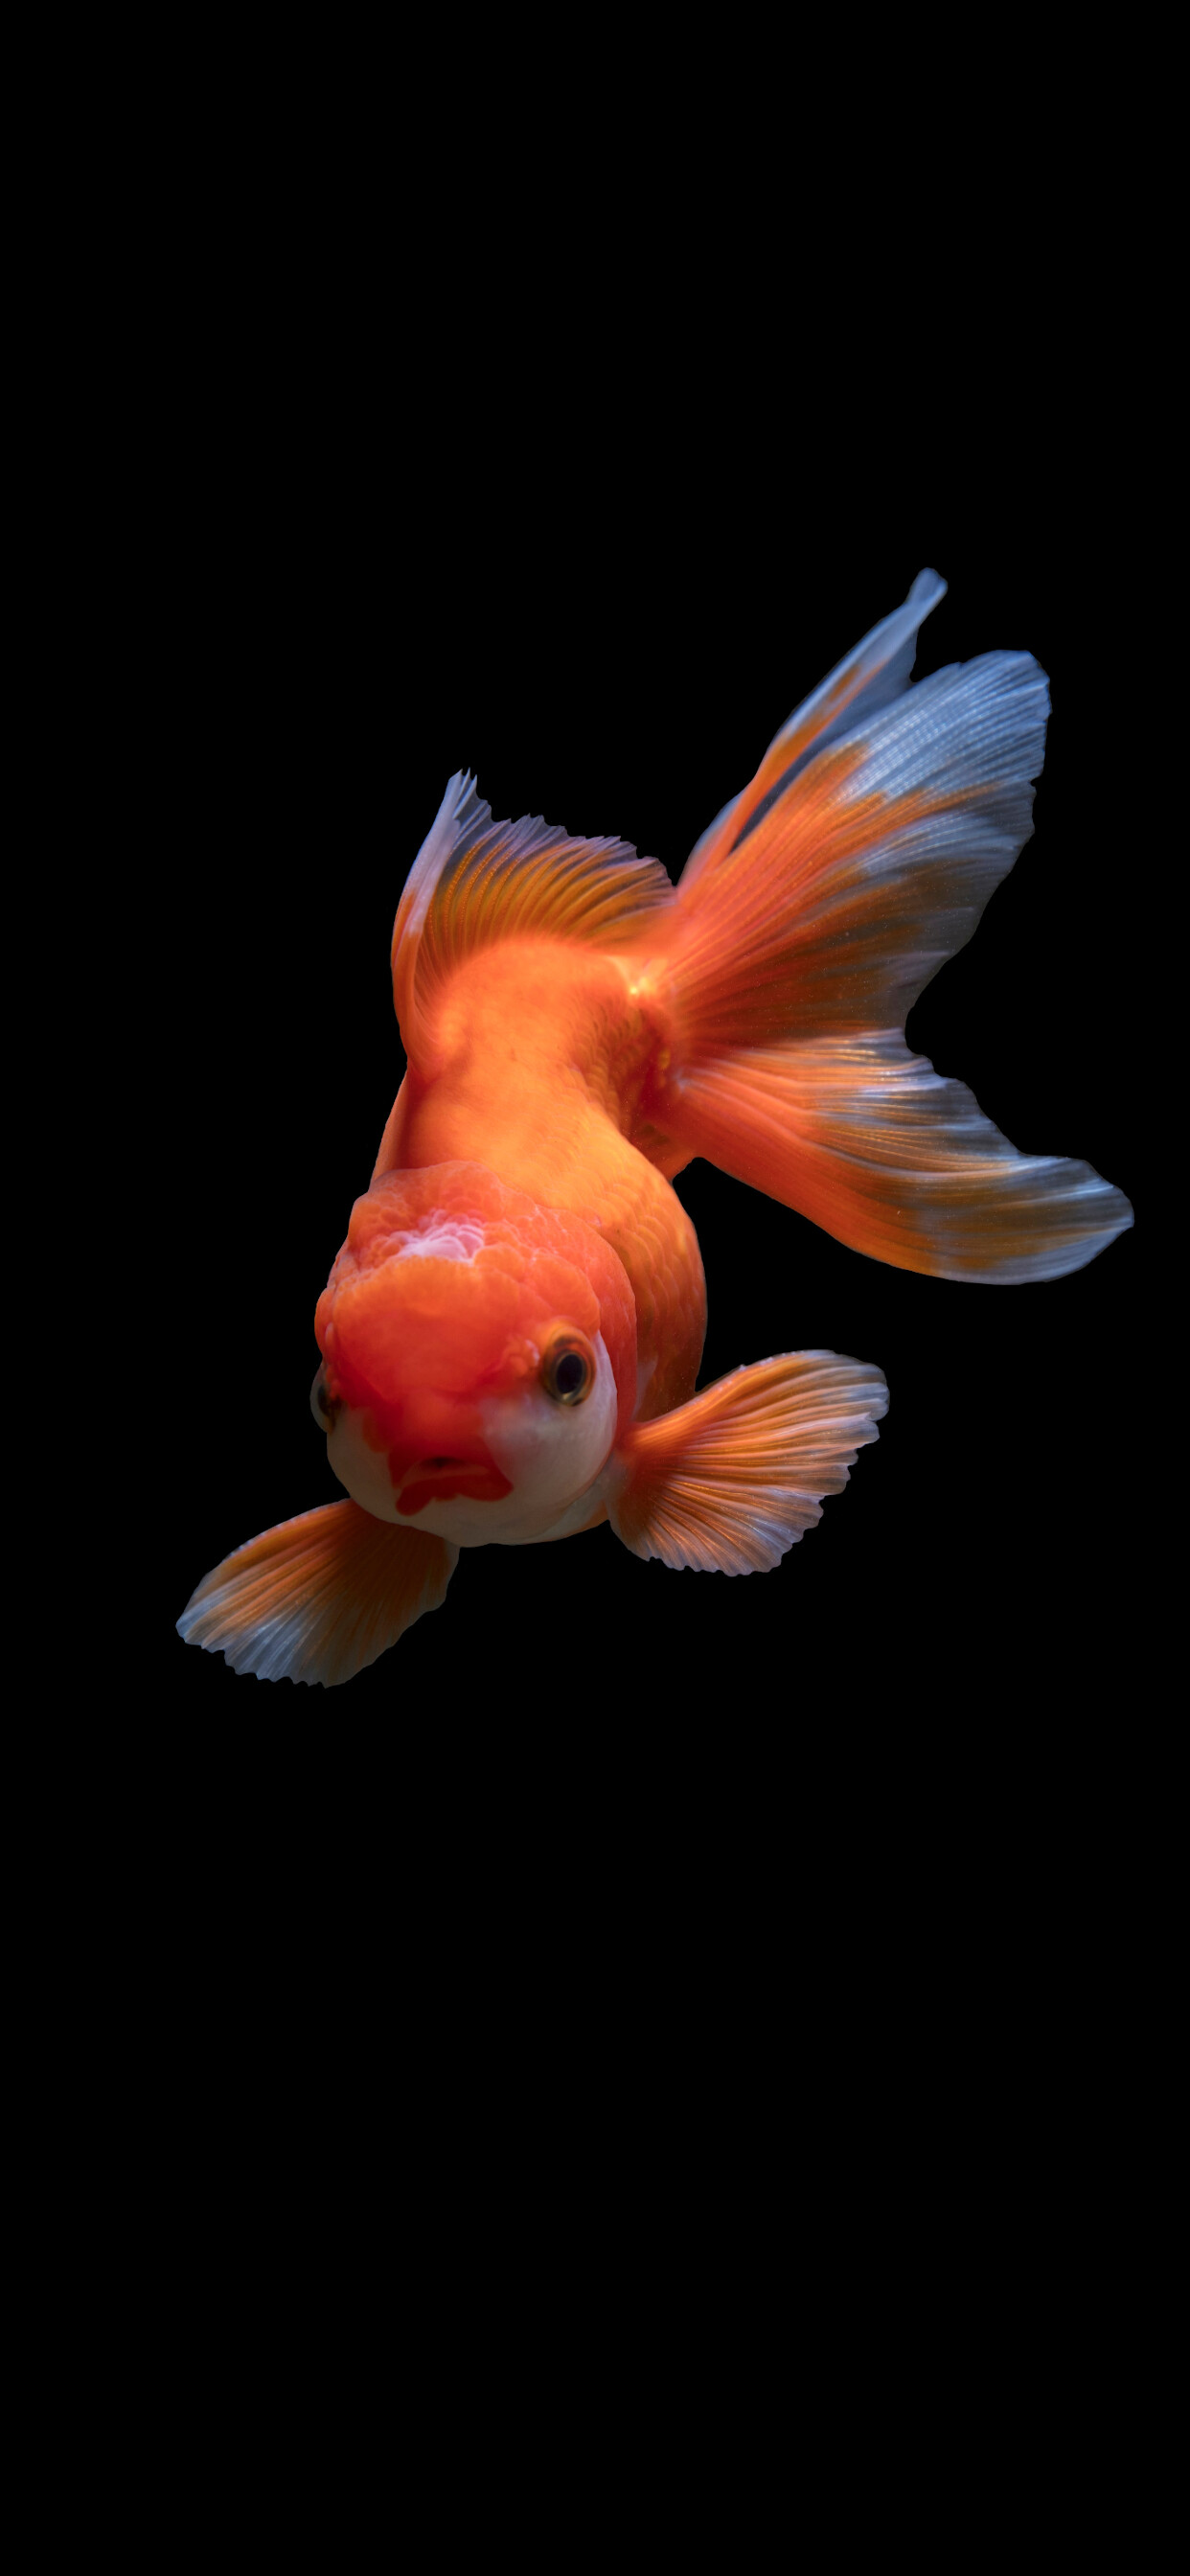 Fish wallpaper for iPhone, Sleek and stylish, Perfect for any iPhone model, Beautiful aquatic imagery, 1250x2690 HD Phone